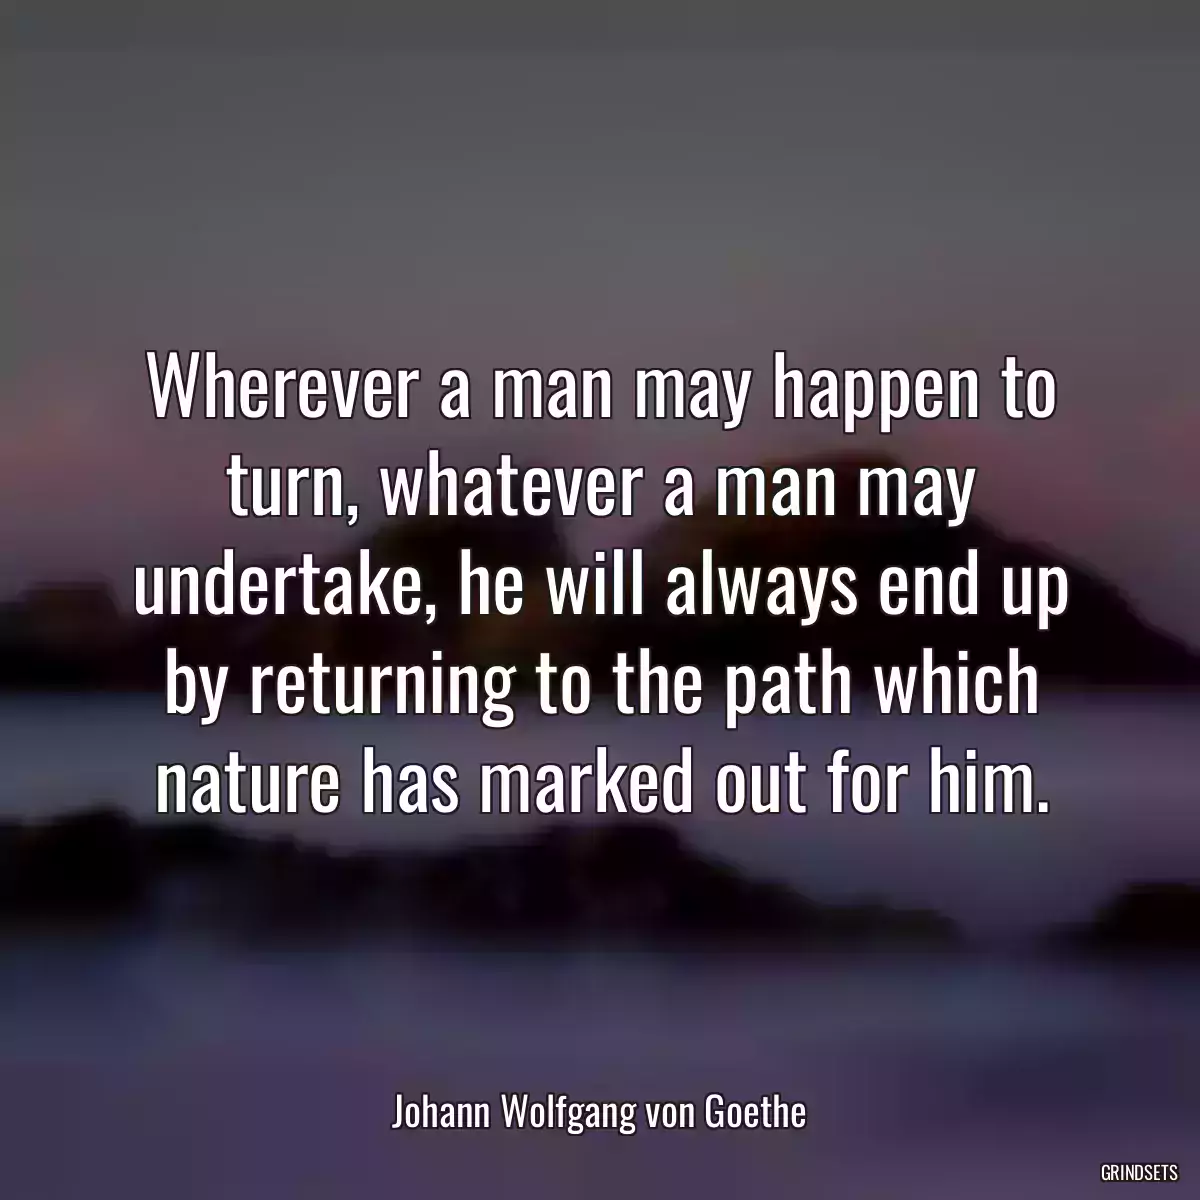 Wherever a man may happen to turn, whatever a man may undertake, he will always end up by returning to the path which nature has marked out for him.